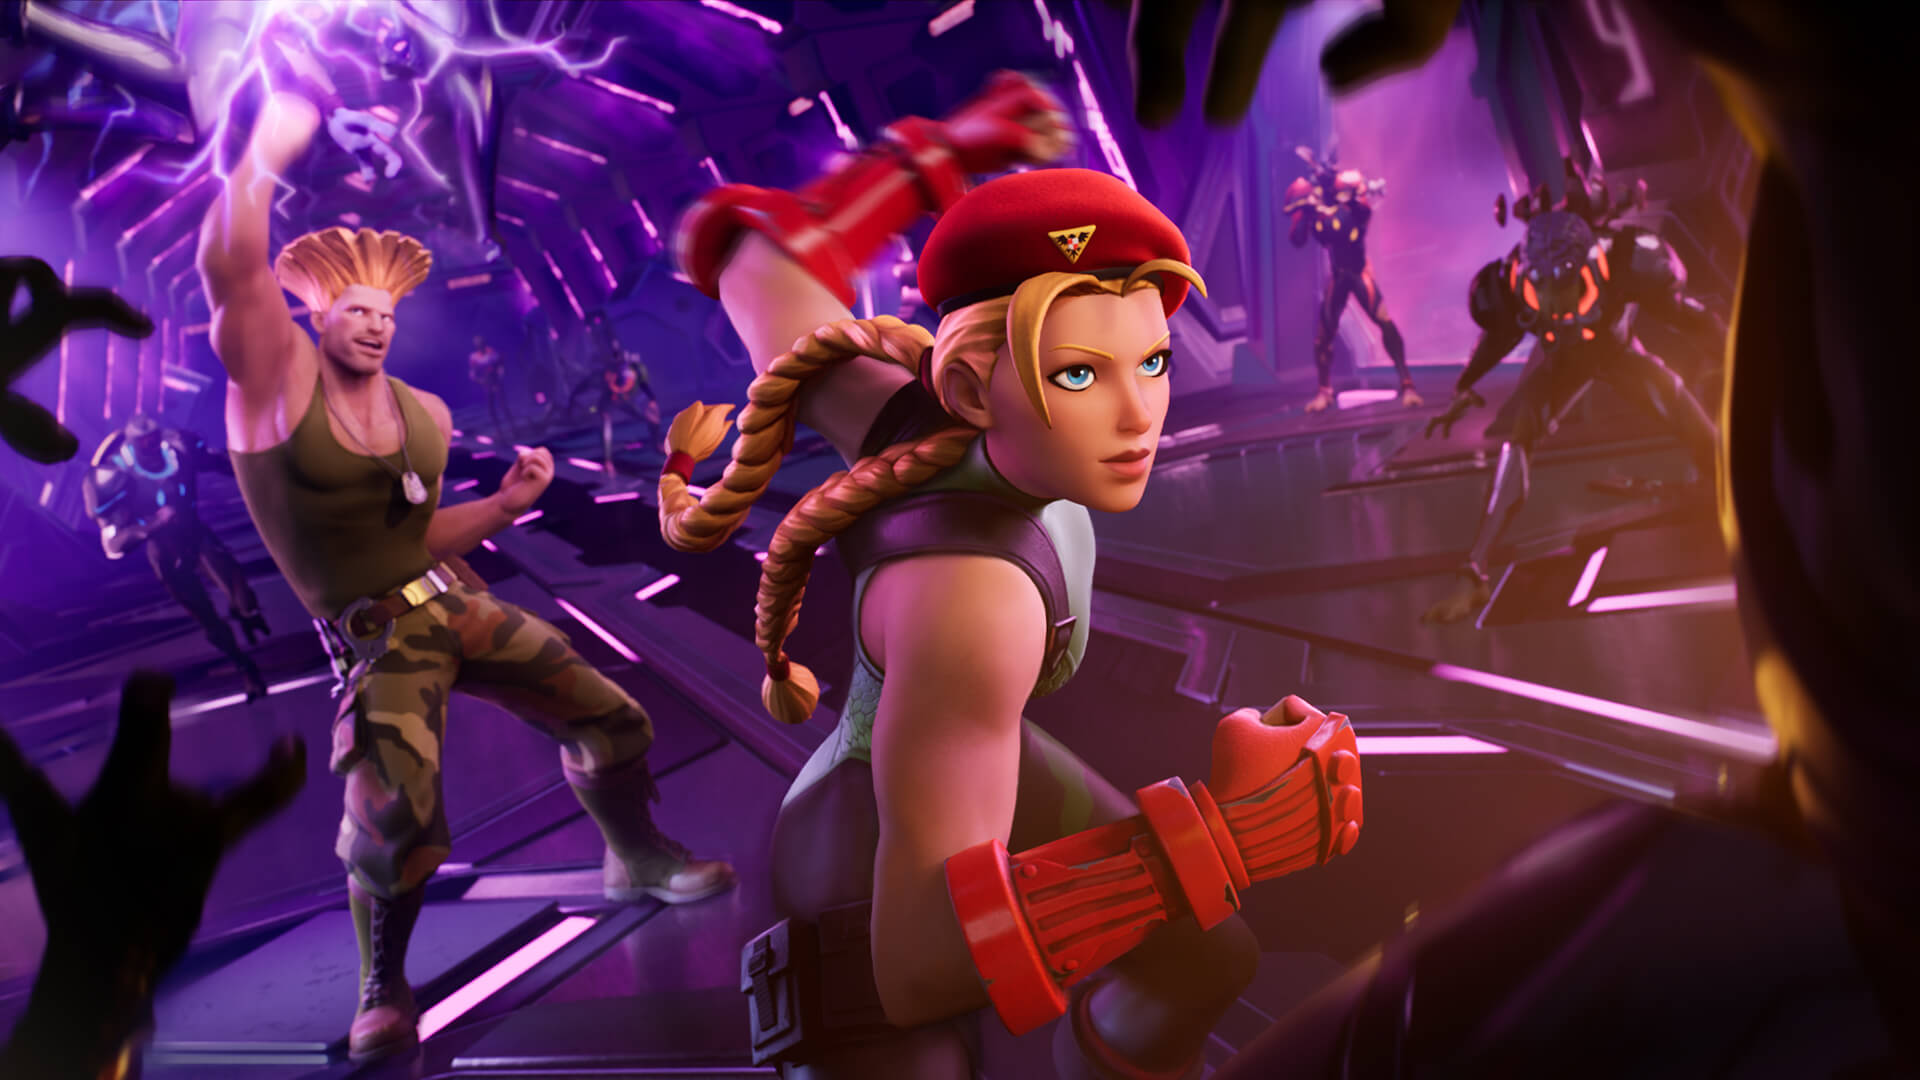 Street Fighter returns to Fortnite for Round 2